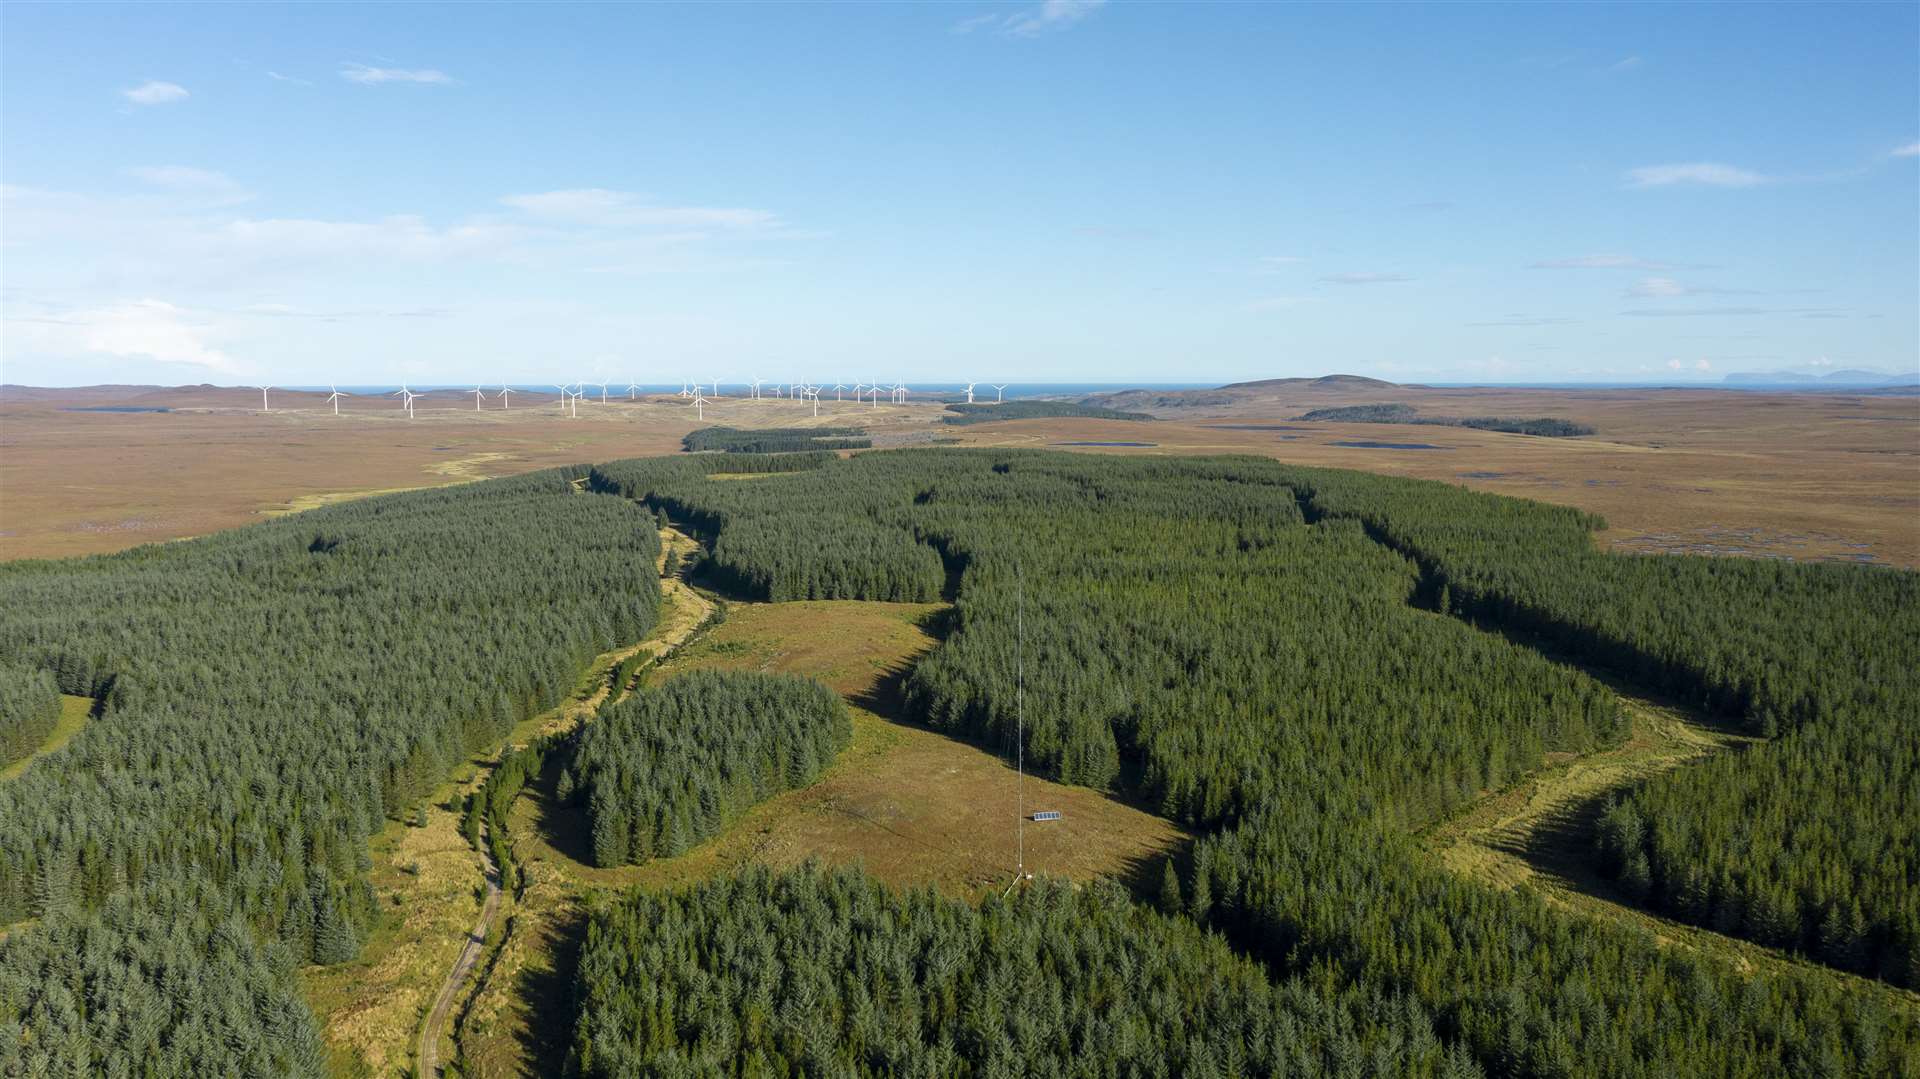 The Strathy South development site is to the south of SSE Renewables' existing Strathy North wind farm.